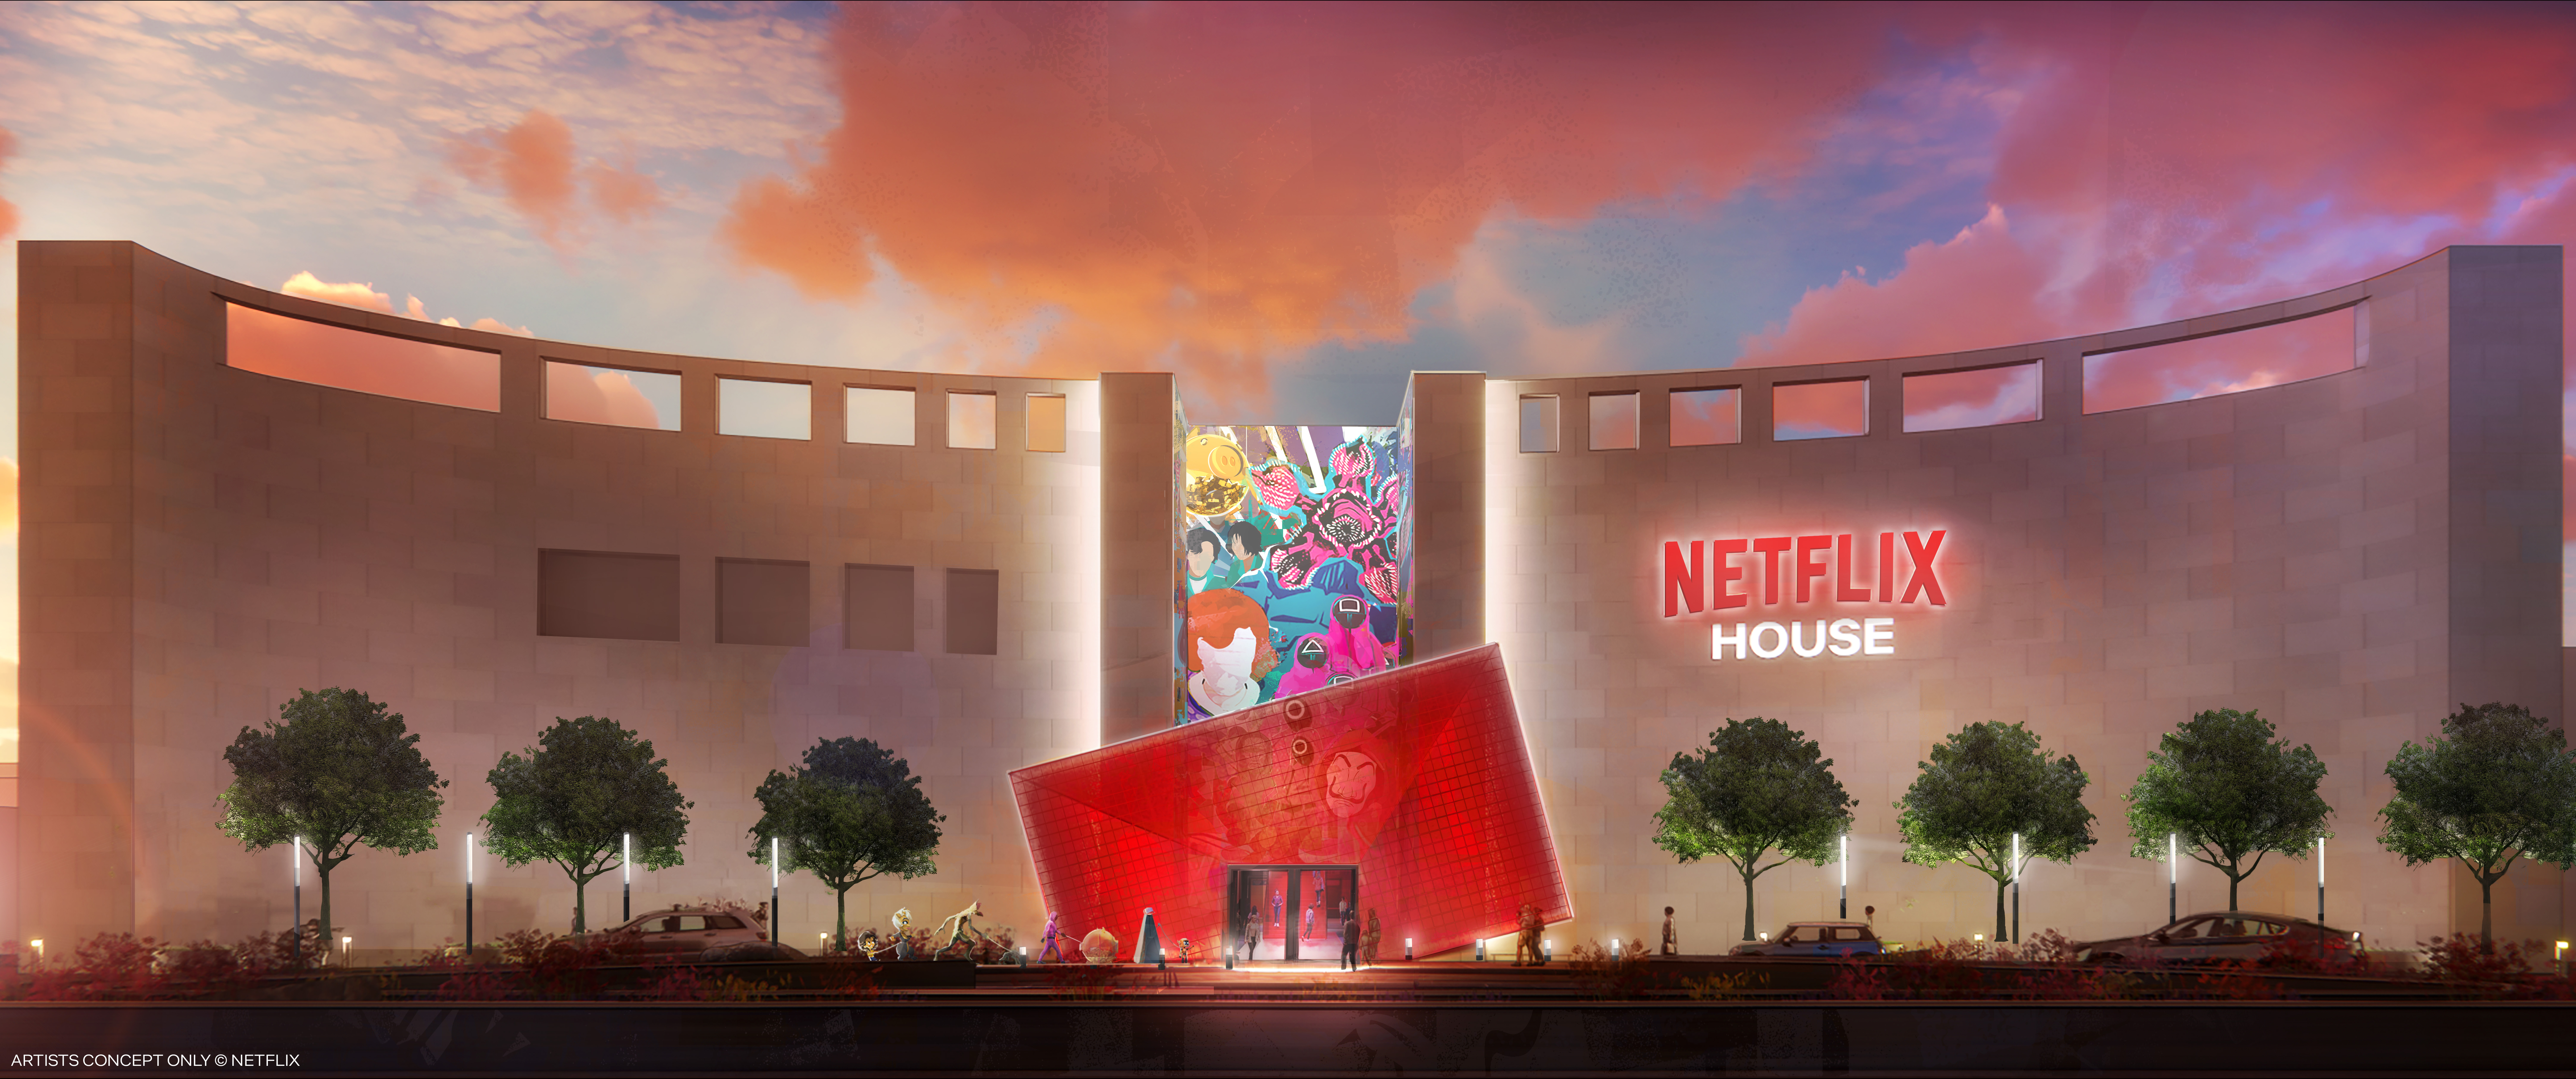 Netflix announced its first two locations of its Netflix House will be in Pennsylvania and Texas.